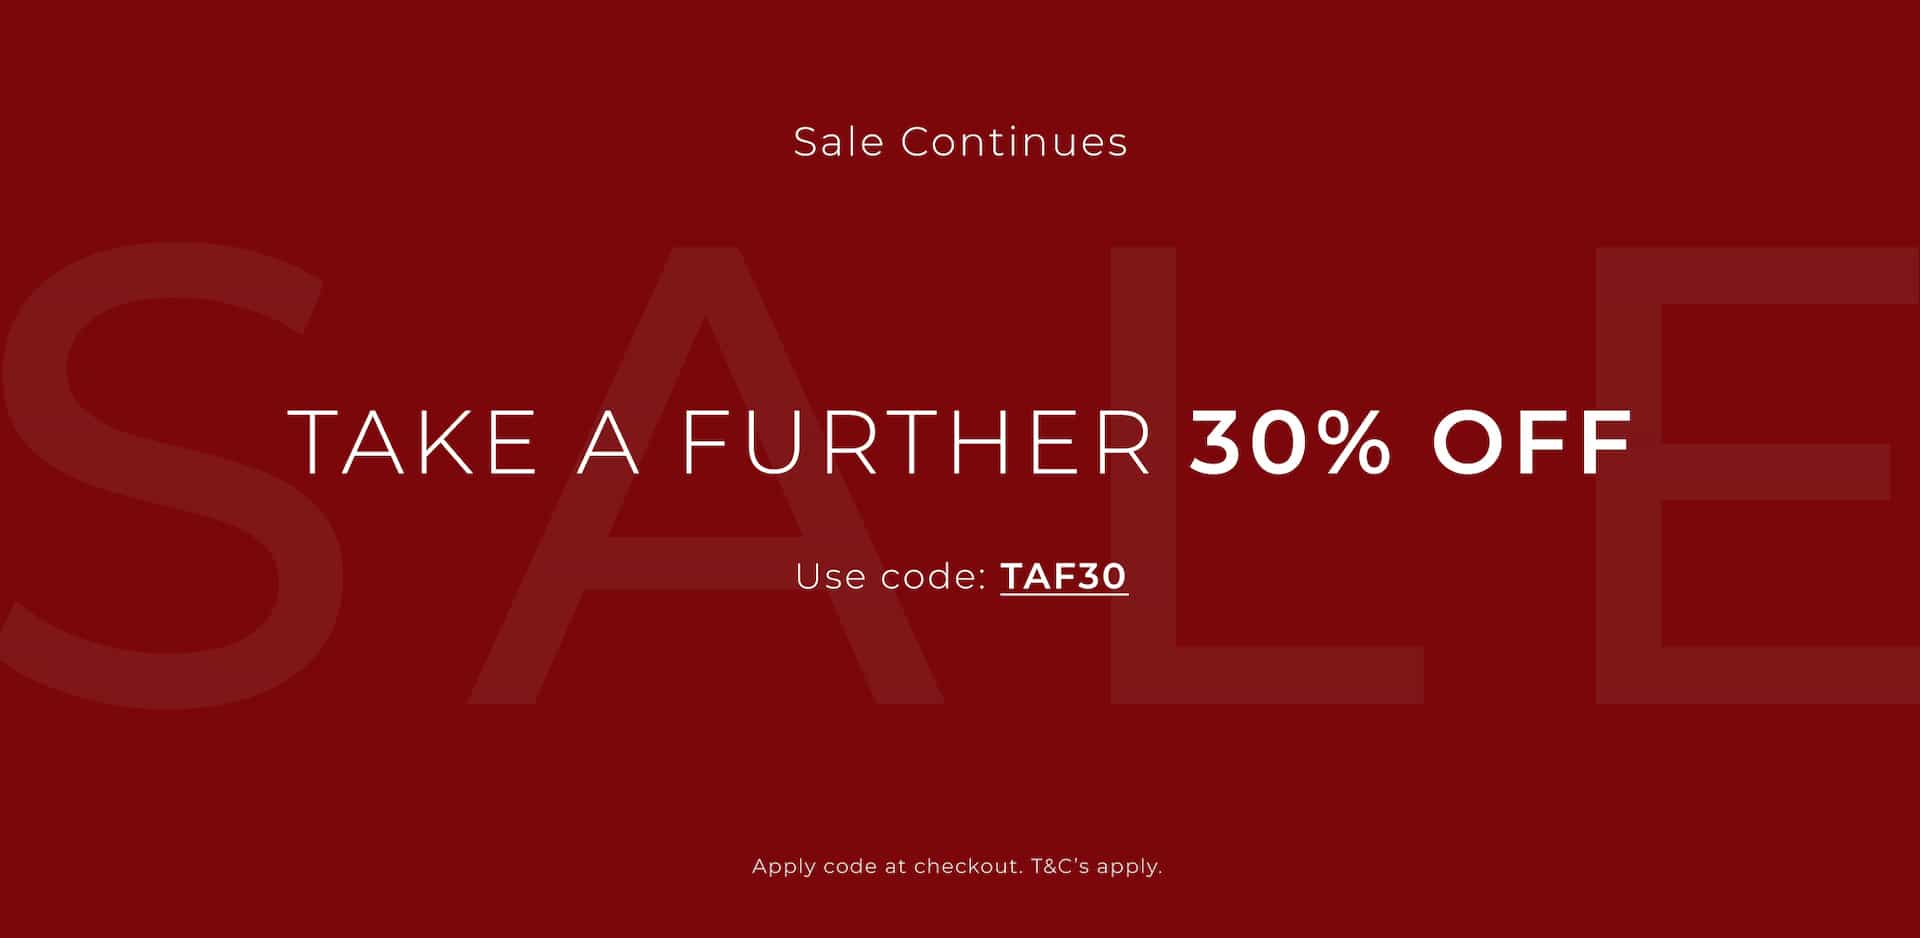 Take a further extra 30% OFF on sale styles